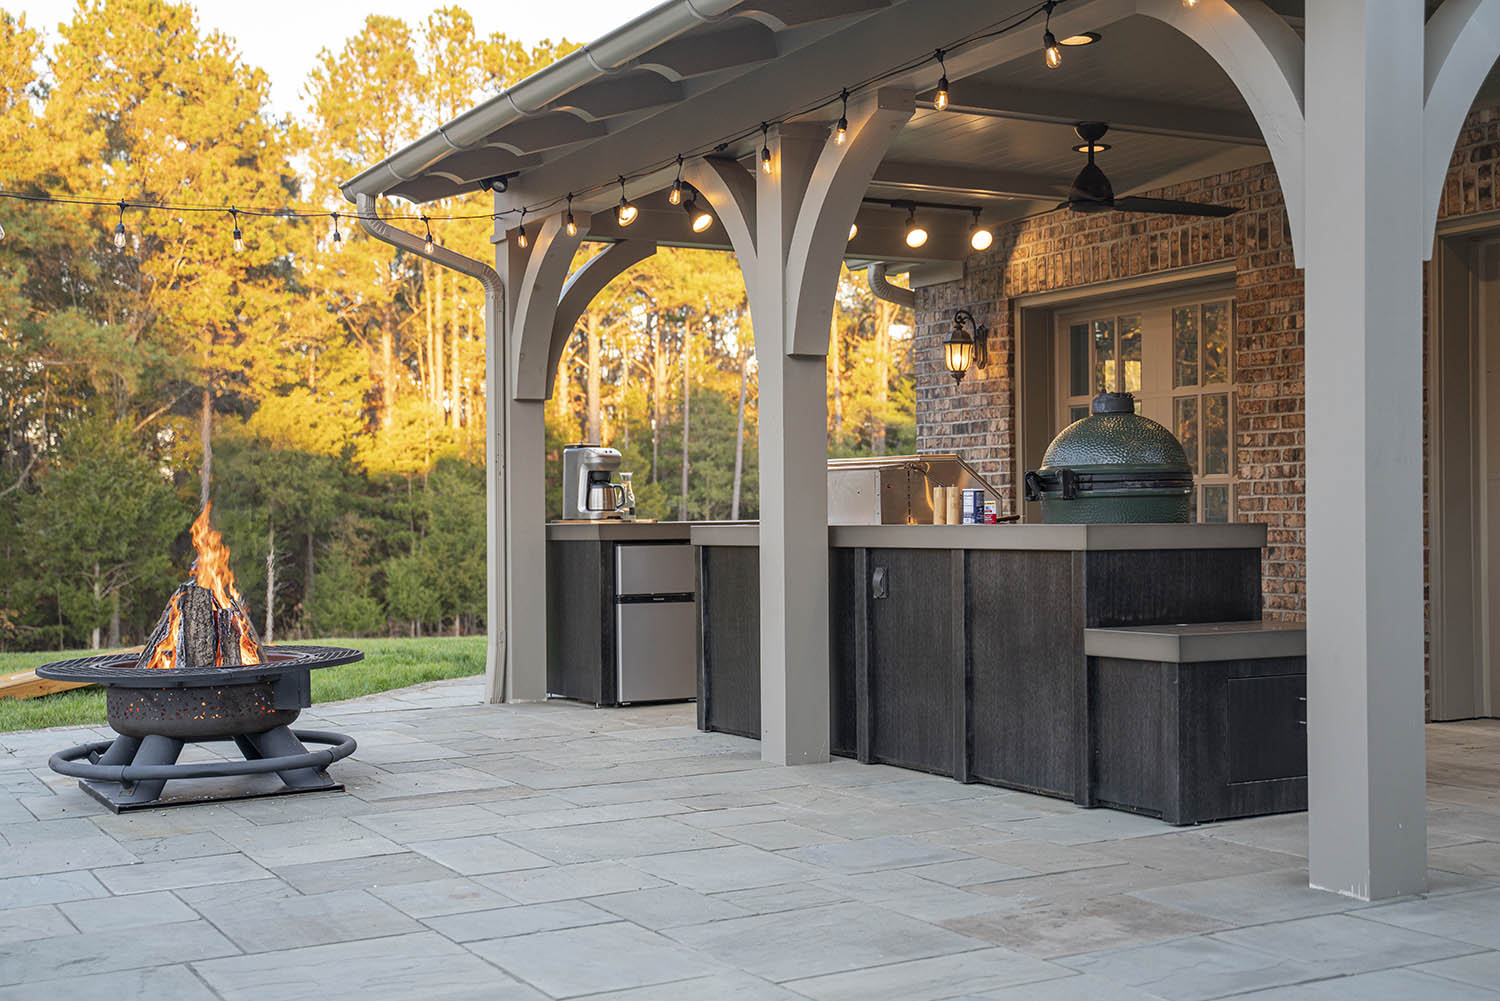 Design Your Own Customized Outdoor Kitchen with These 10 Tips